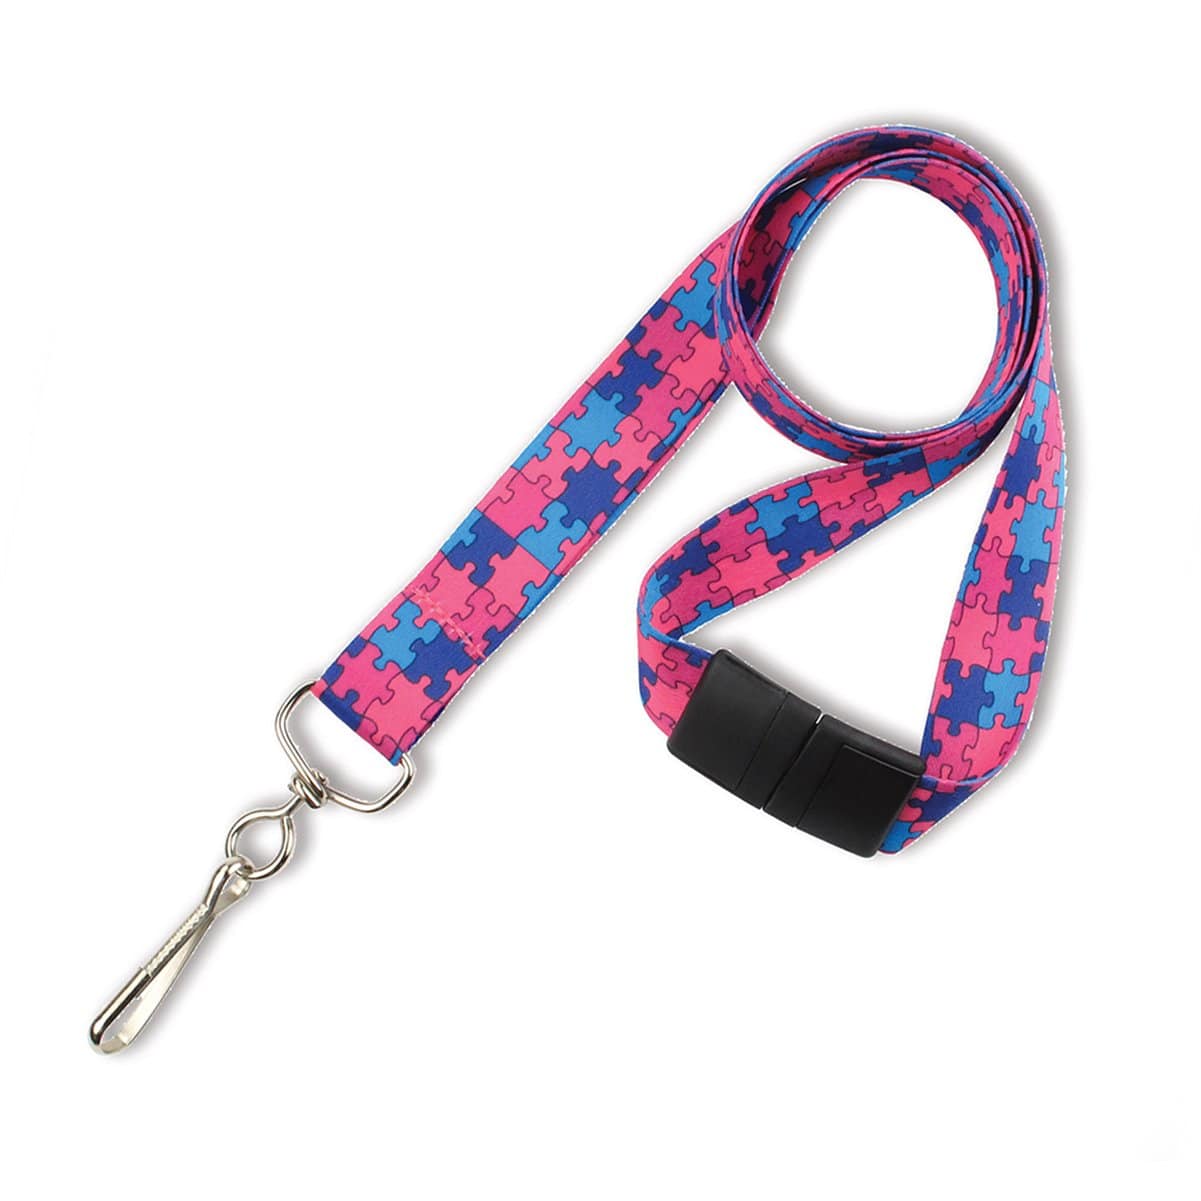 An Autism Awareness Flat Breakaway Lanyard With Swivel Hook (2138-5281, 2138-5282) with a puzzle piece pattern in shades of blue, pink, and purple, featuring a metal swivel hook and a breakaway safety clasp. Perfect for Autism Awareness events, this breakaway lanyard combines style and function.
